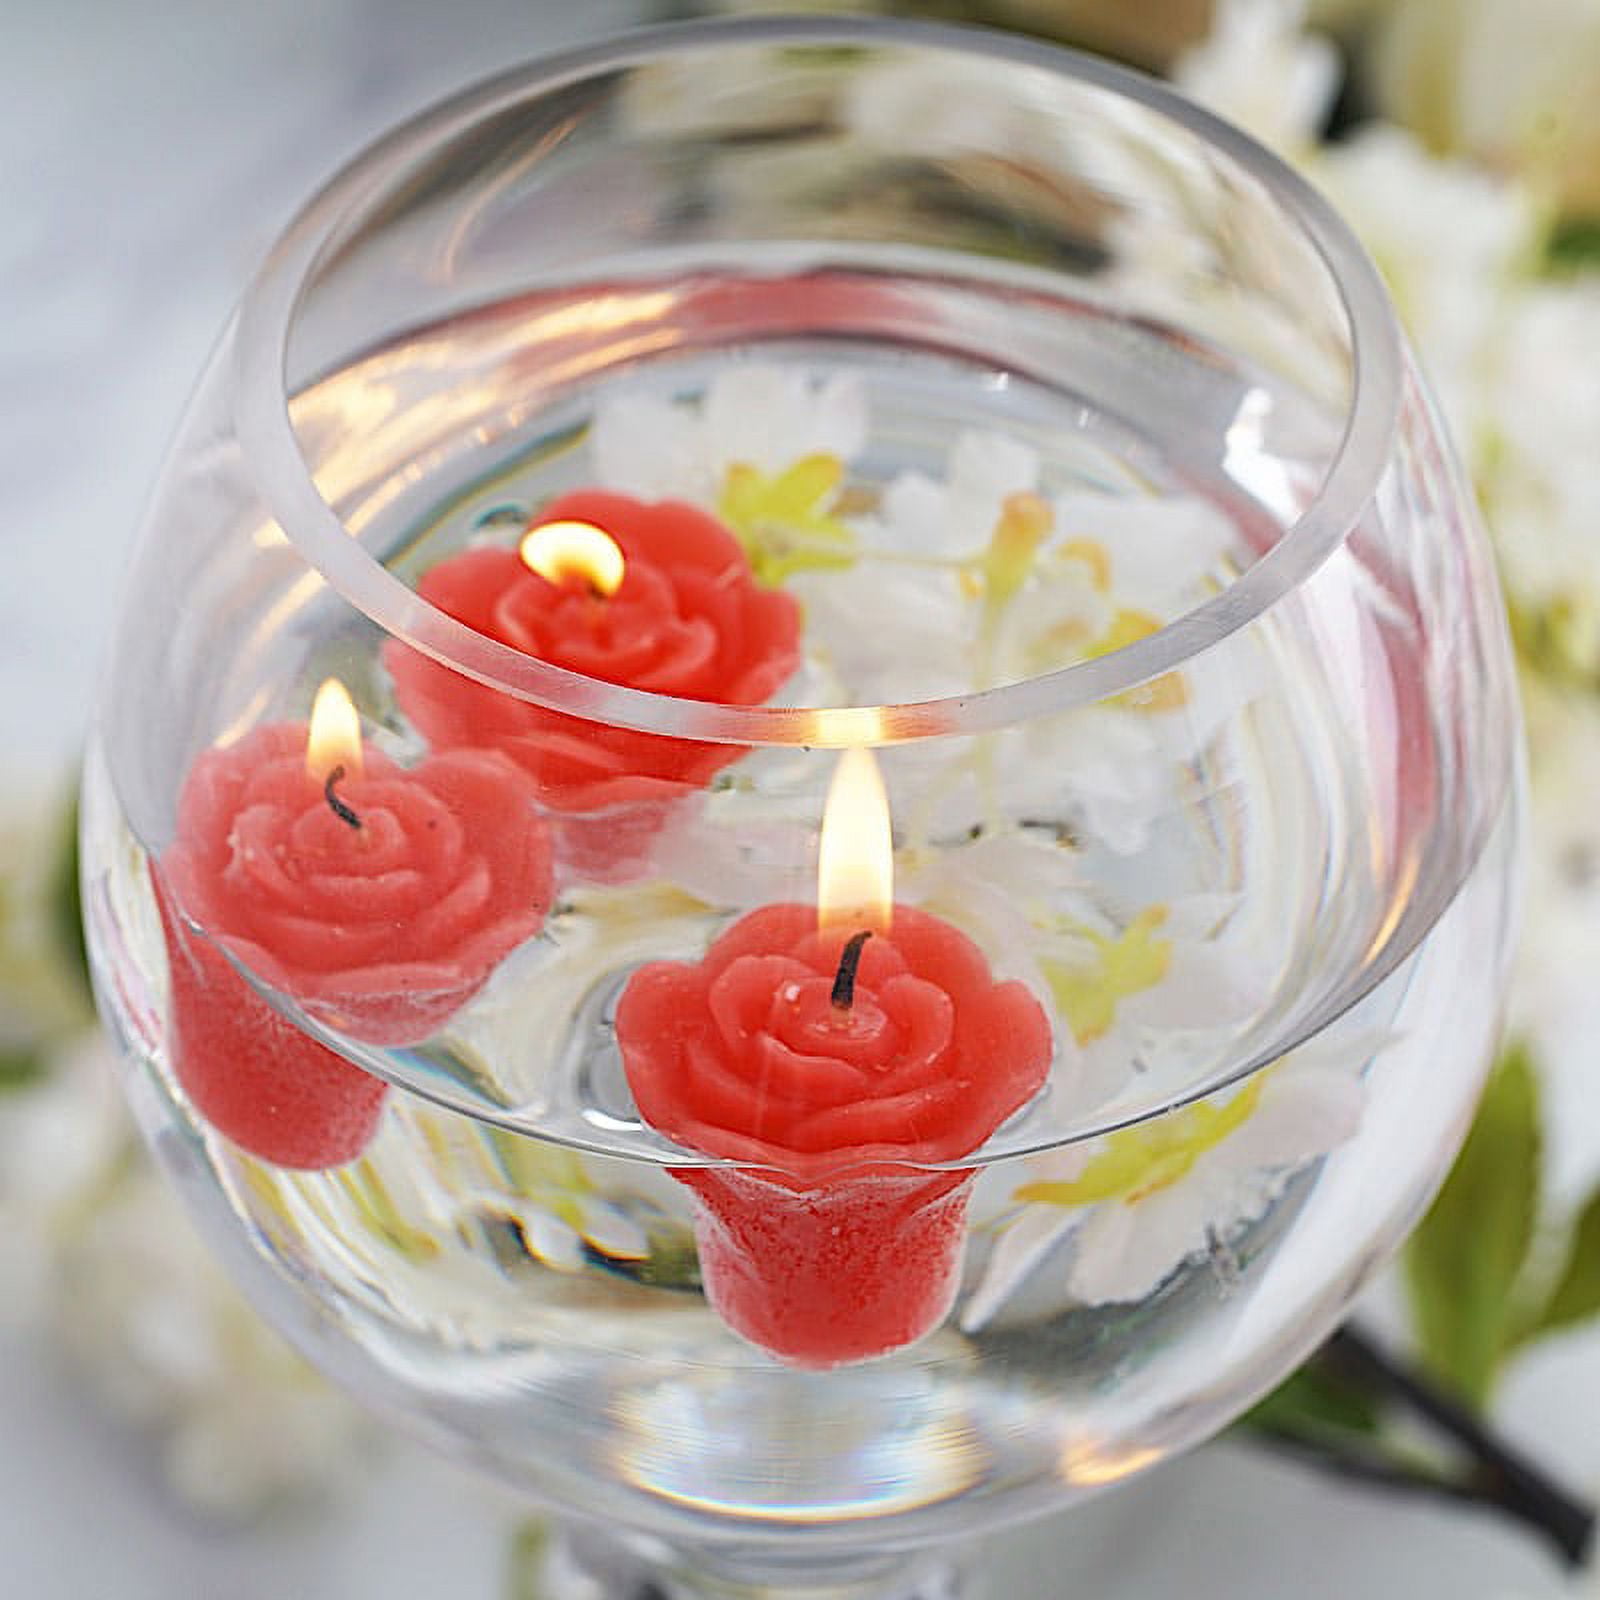 Vikakiooze Valentines Day Decor ,Home Decor 12 Pieces Rose Tealight Candles  Handmade Delicate Rose Flower Candles for Valent 